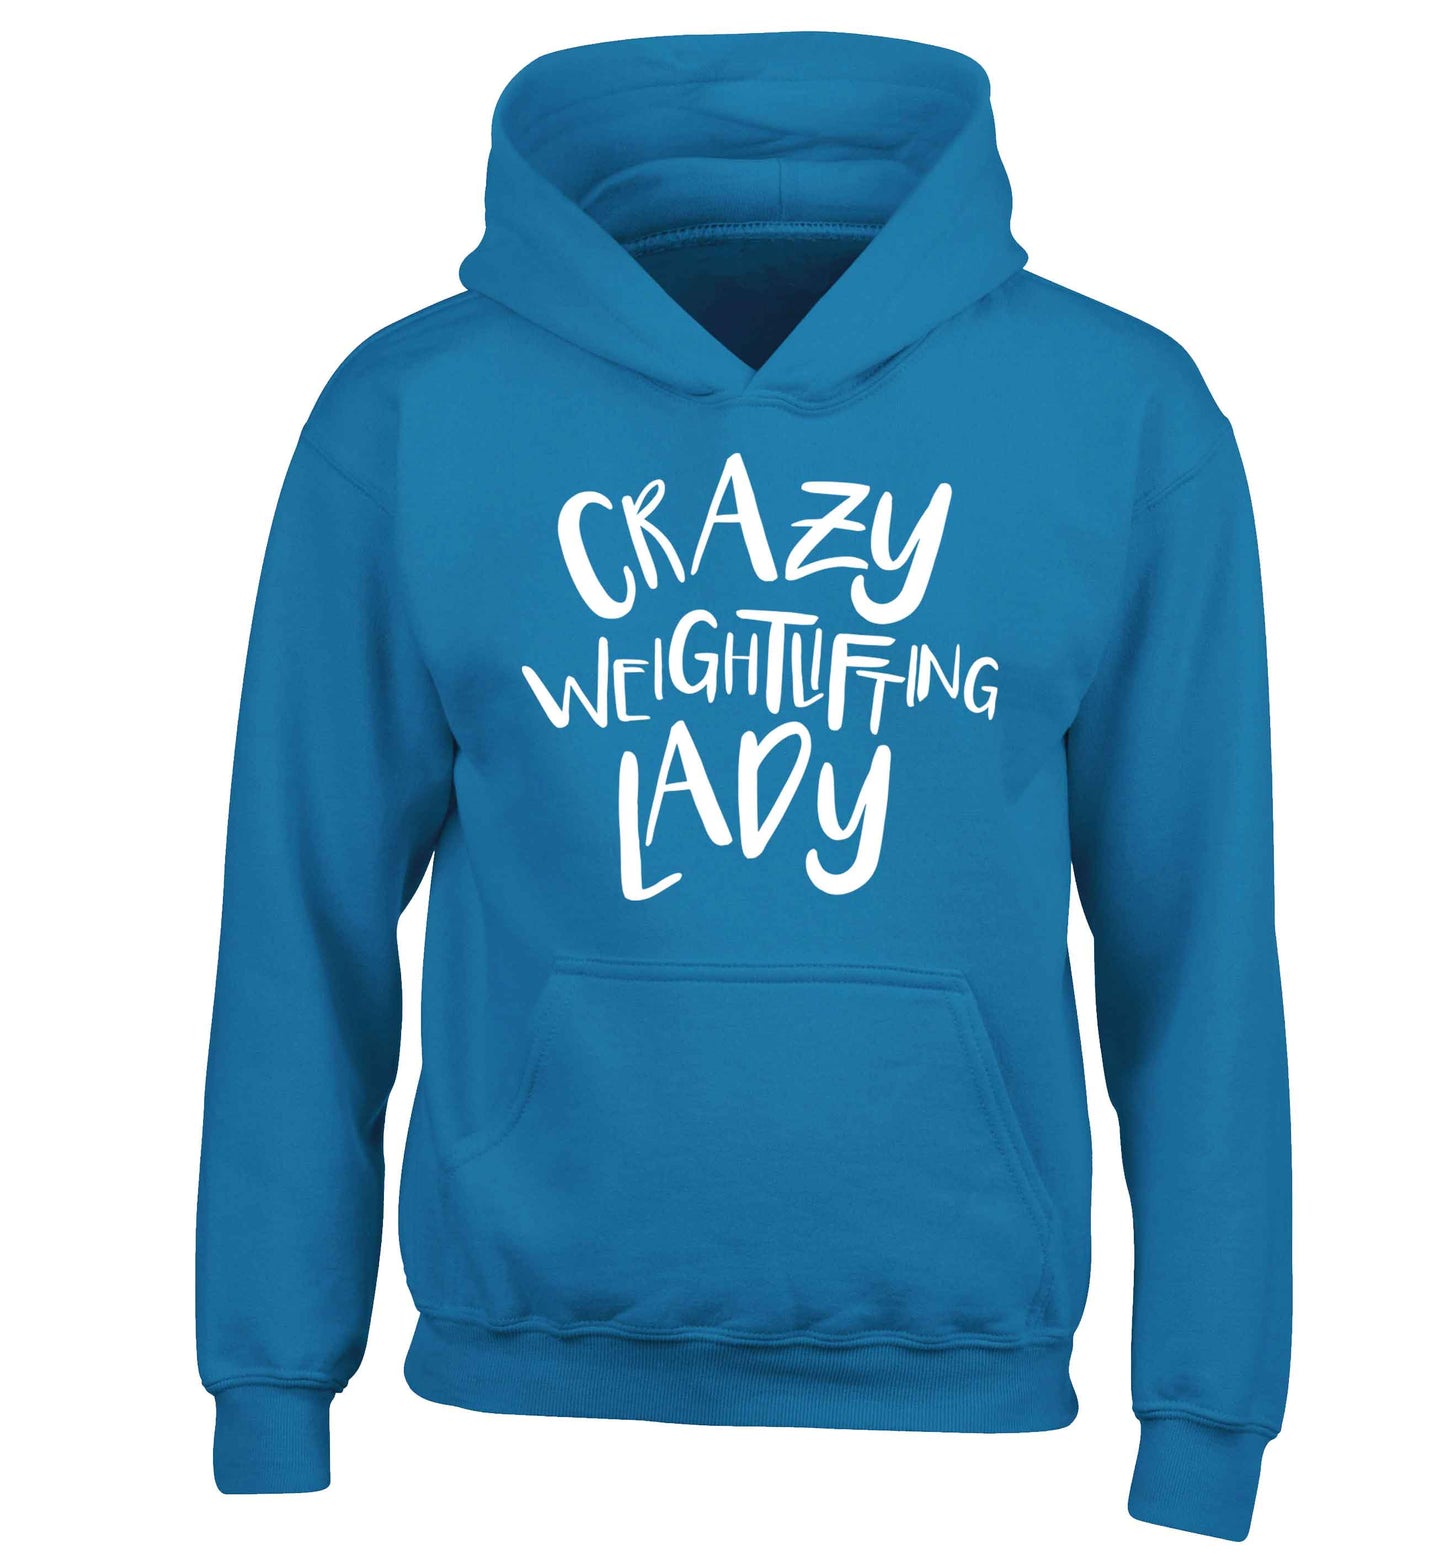 Crazy weightlifting lady children's blue hoodie 12-13 Years